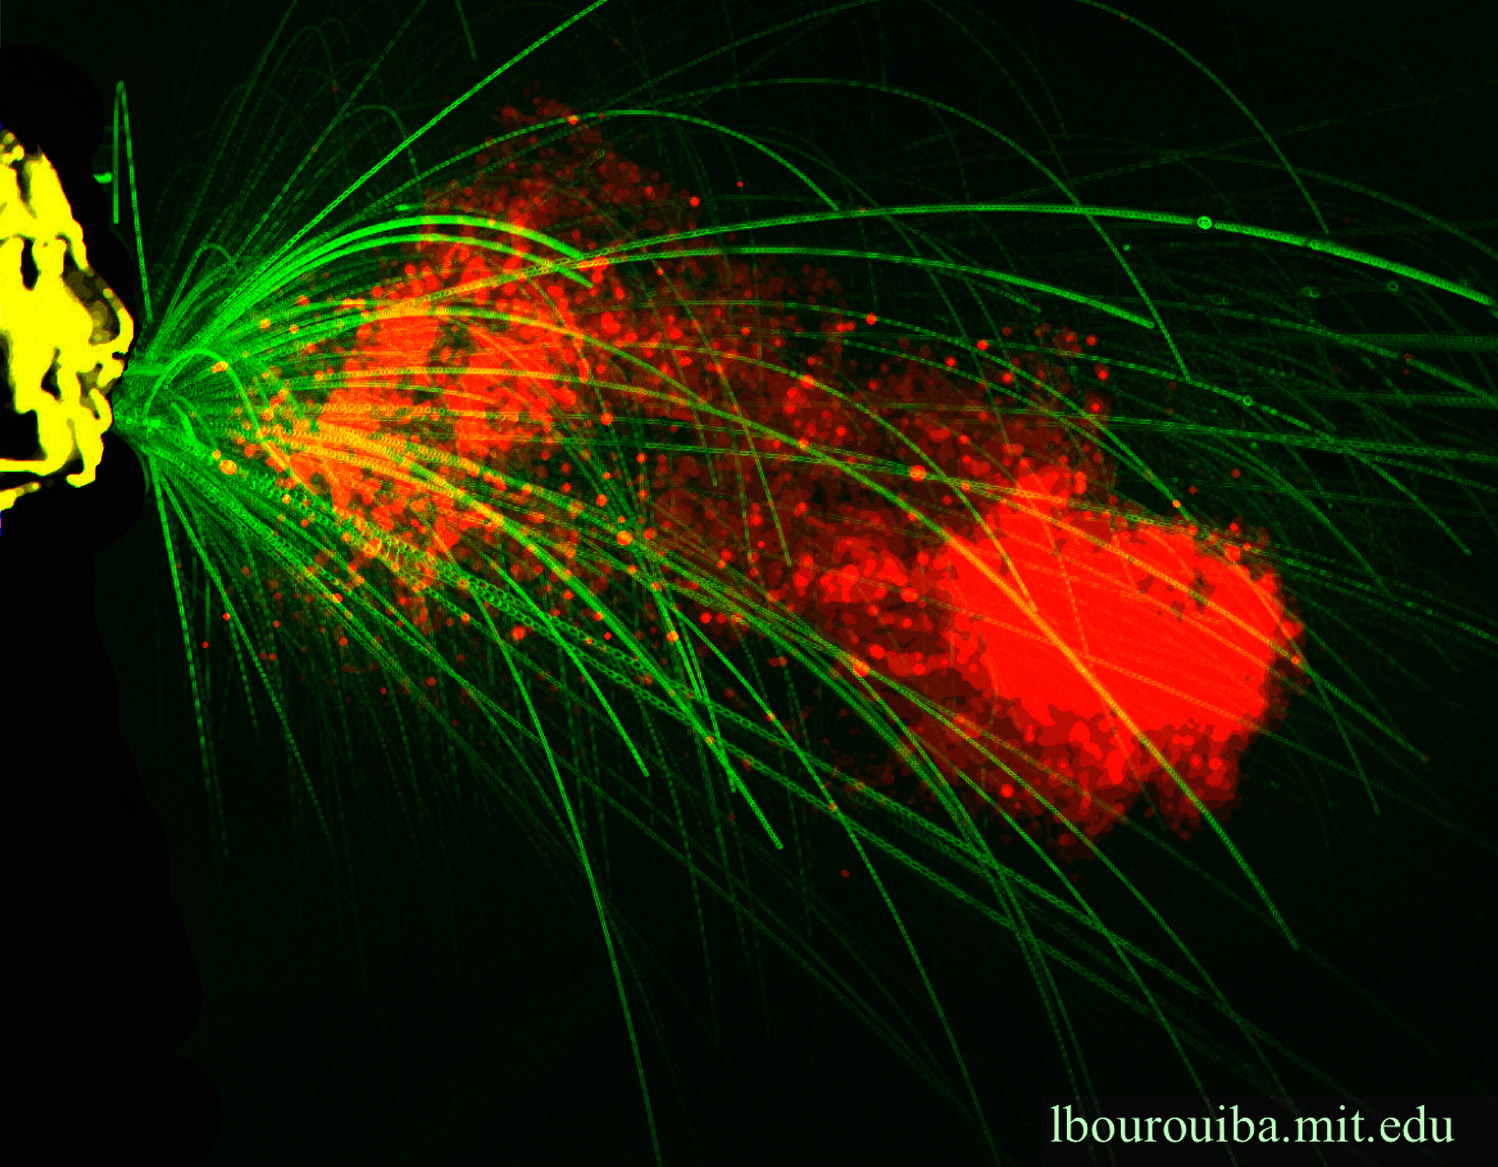 A colored image of the spray and droplets from a sneeze emerging from a human.